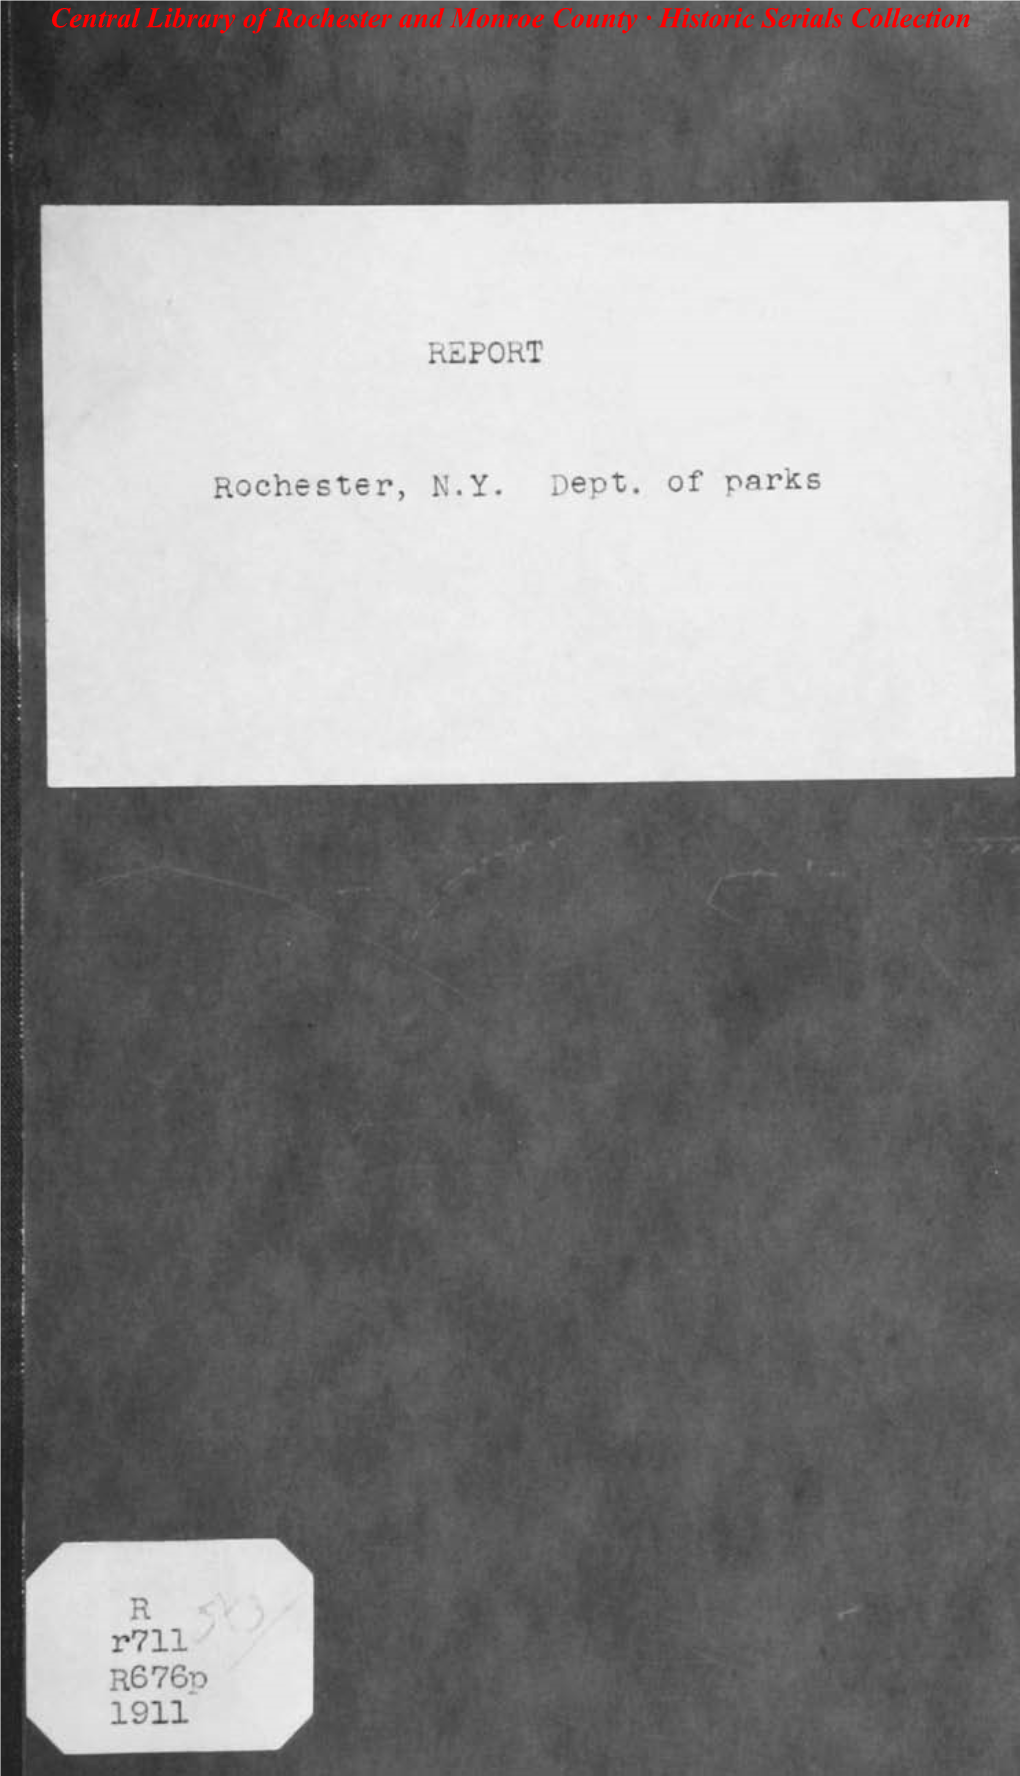 Rochester Park Commissioner 1911 Report